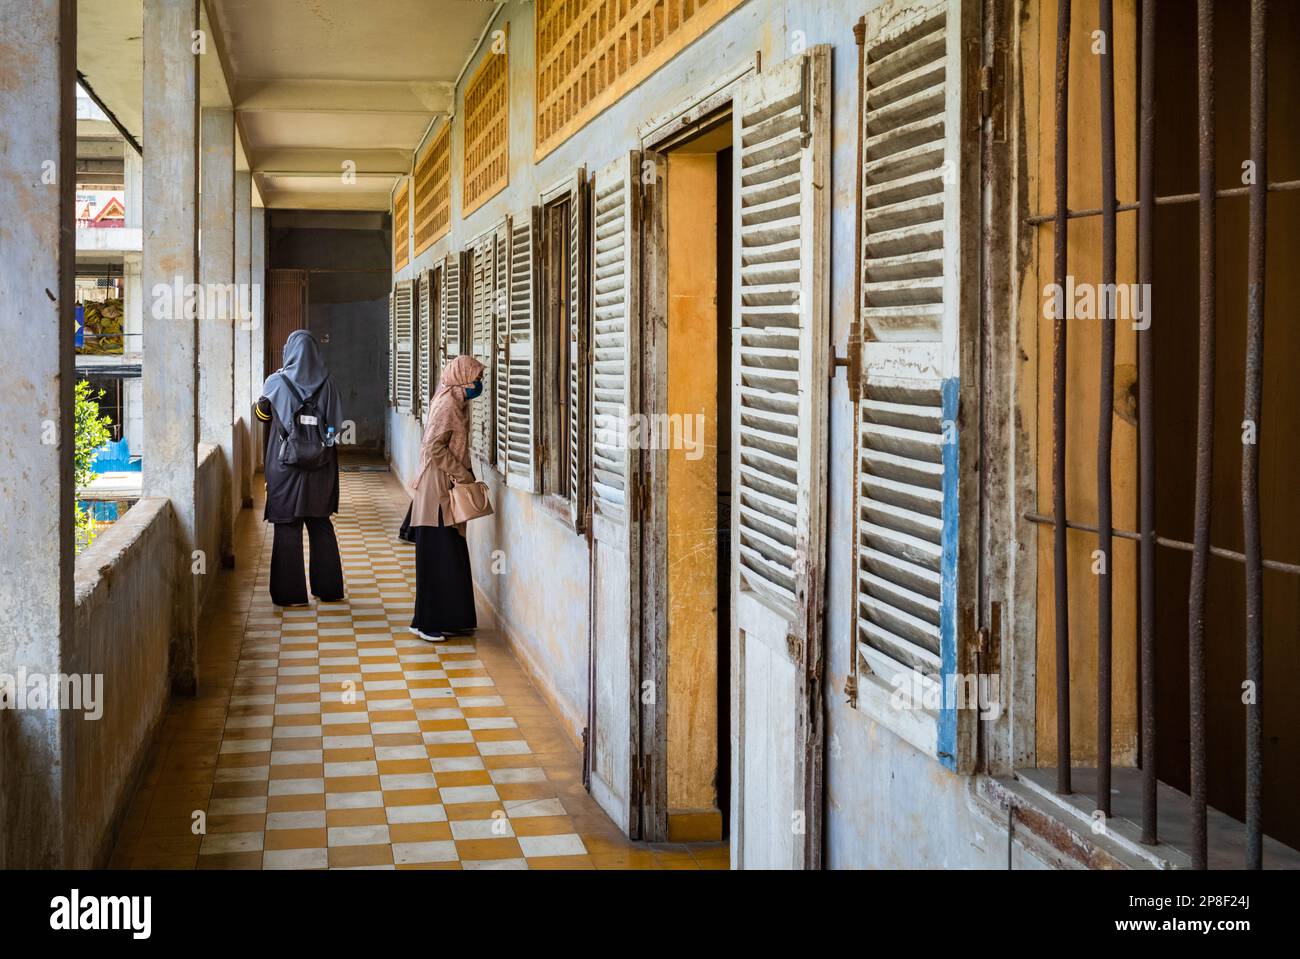 Two Cambodian muslim women look at former classrooms in the notorious Tuol Sleng S-21 torture and genocide prison museum in Phnom Penh, Cambodia Stock Photo